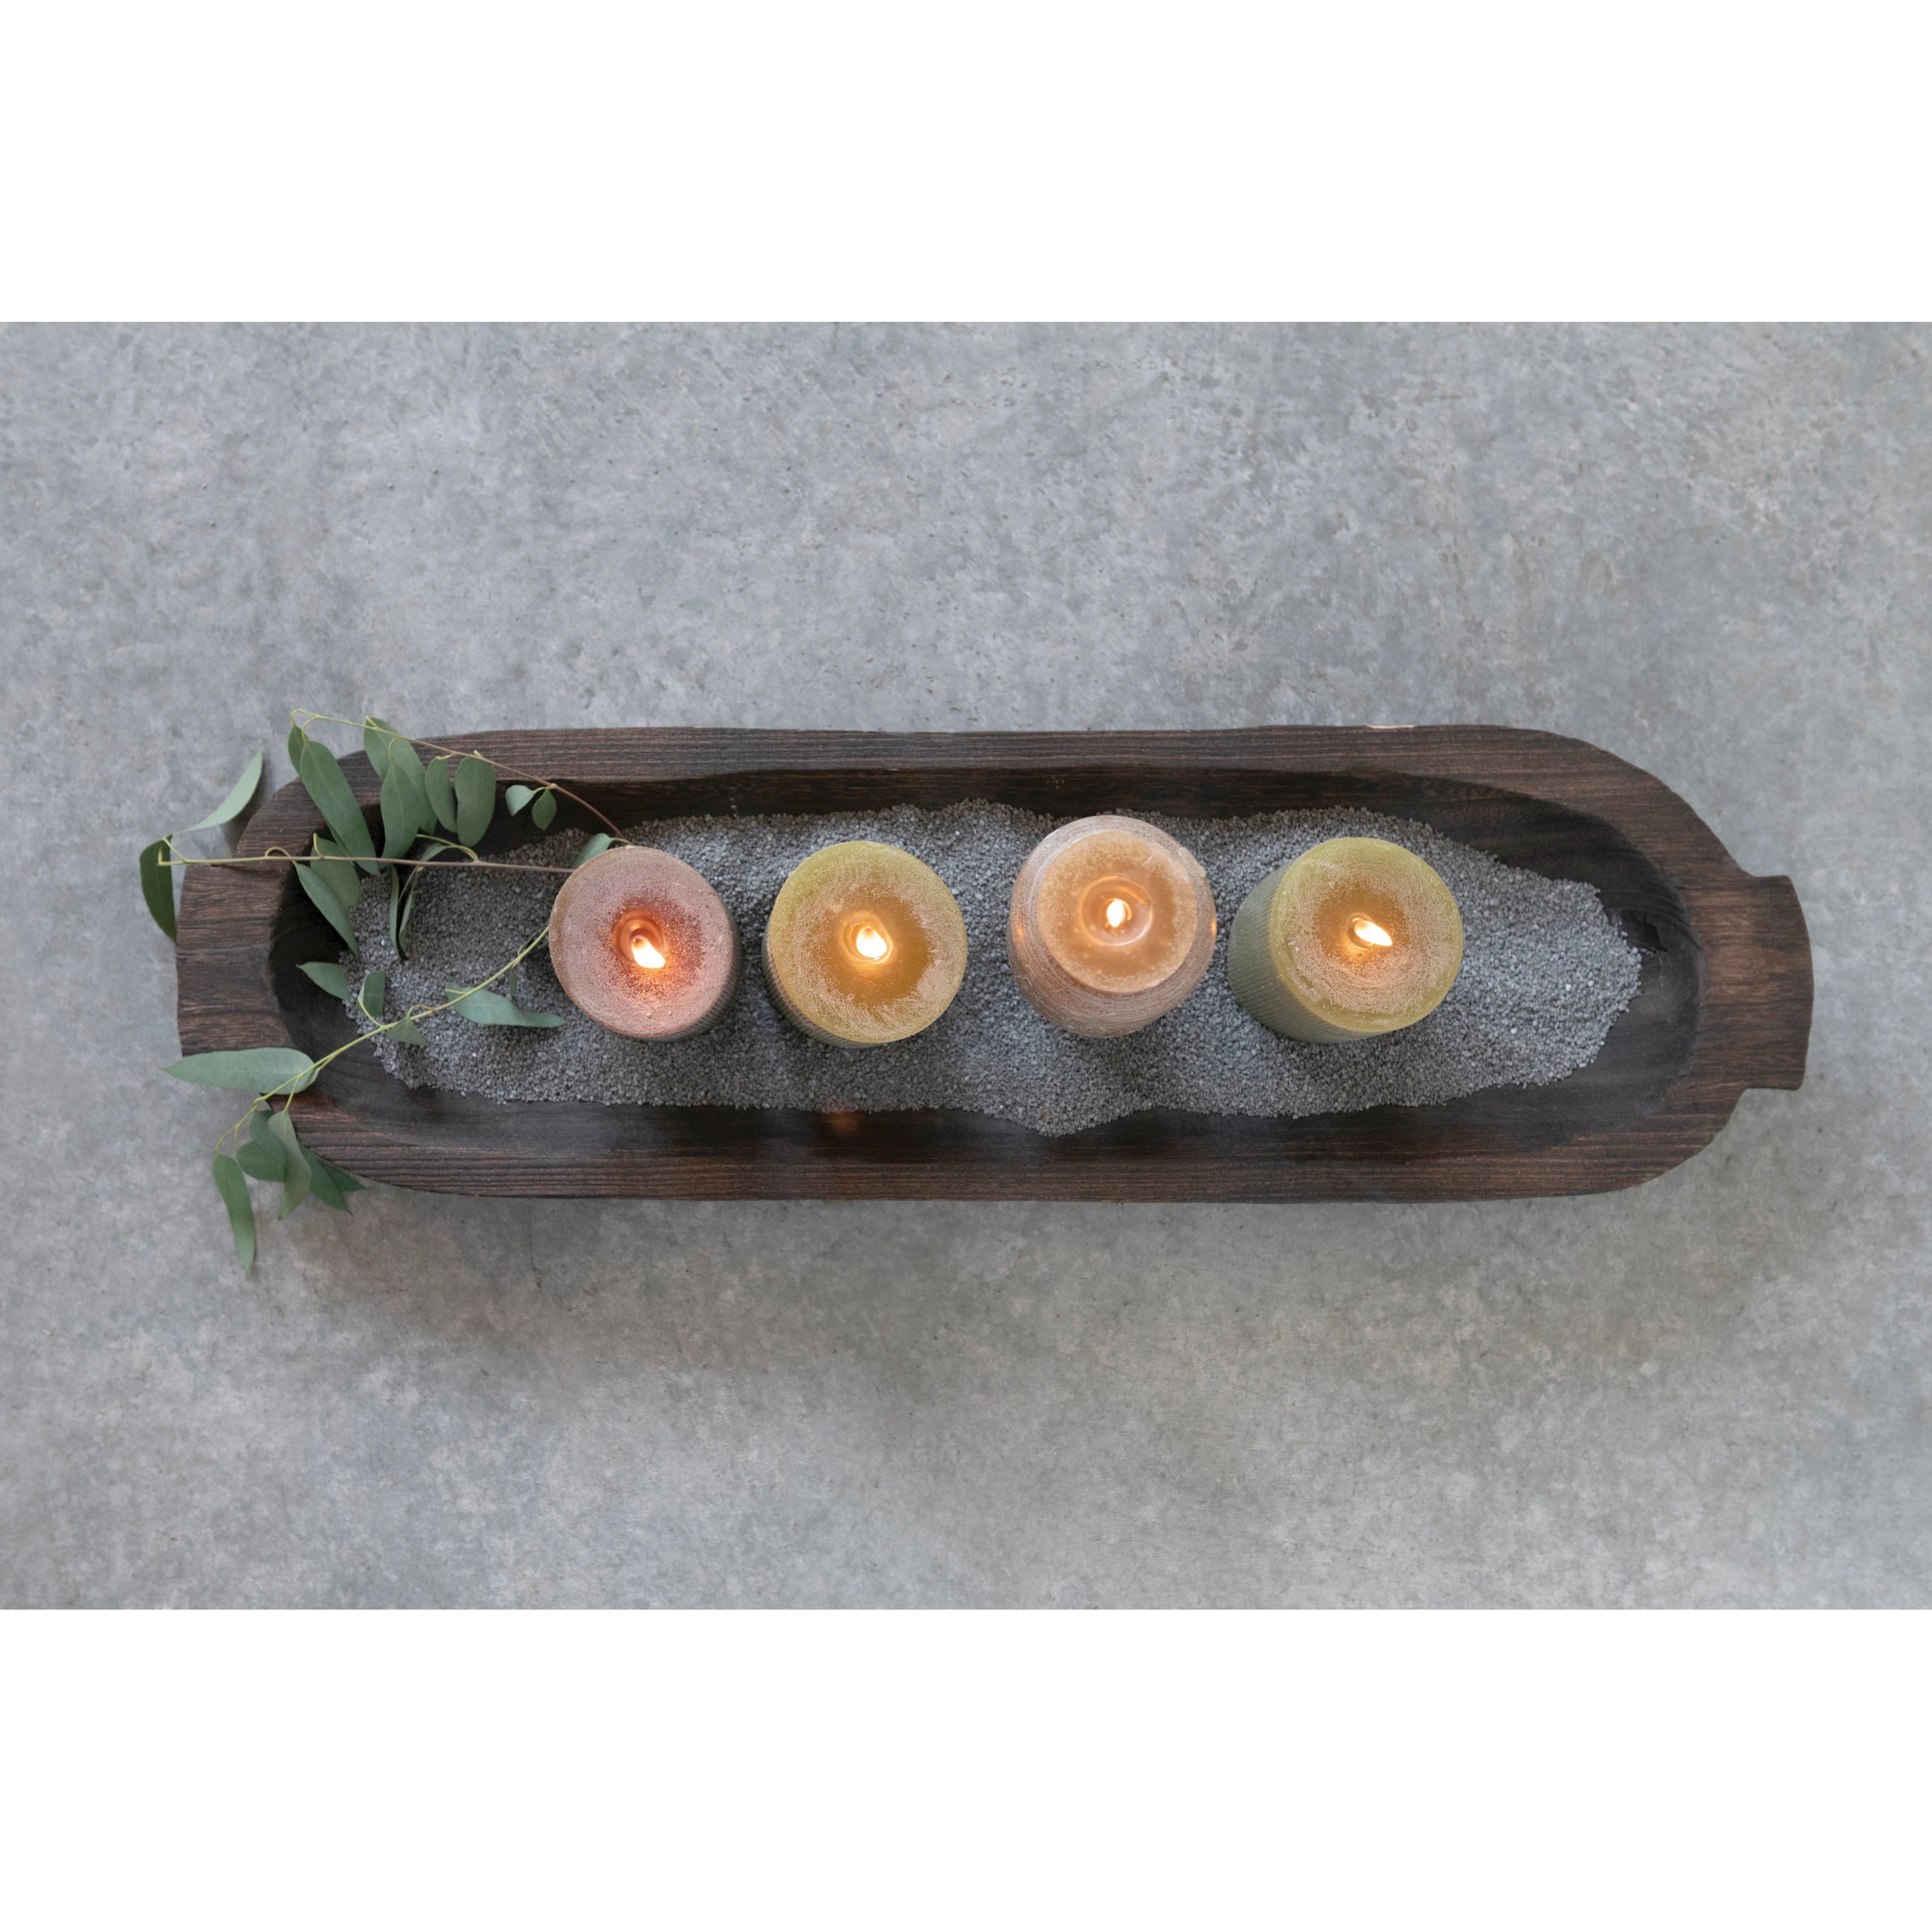 We love this Paulownia Wood Tray on a coffee table, entryway table, or dining table to collect sentimental items or decorative stones.  Size: 27.75"L x 8.25"W x 2.25"H